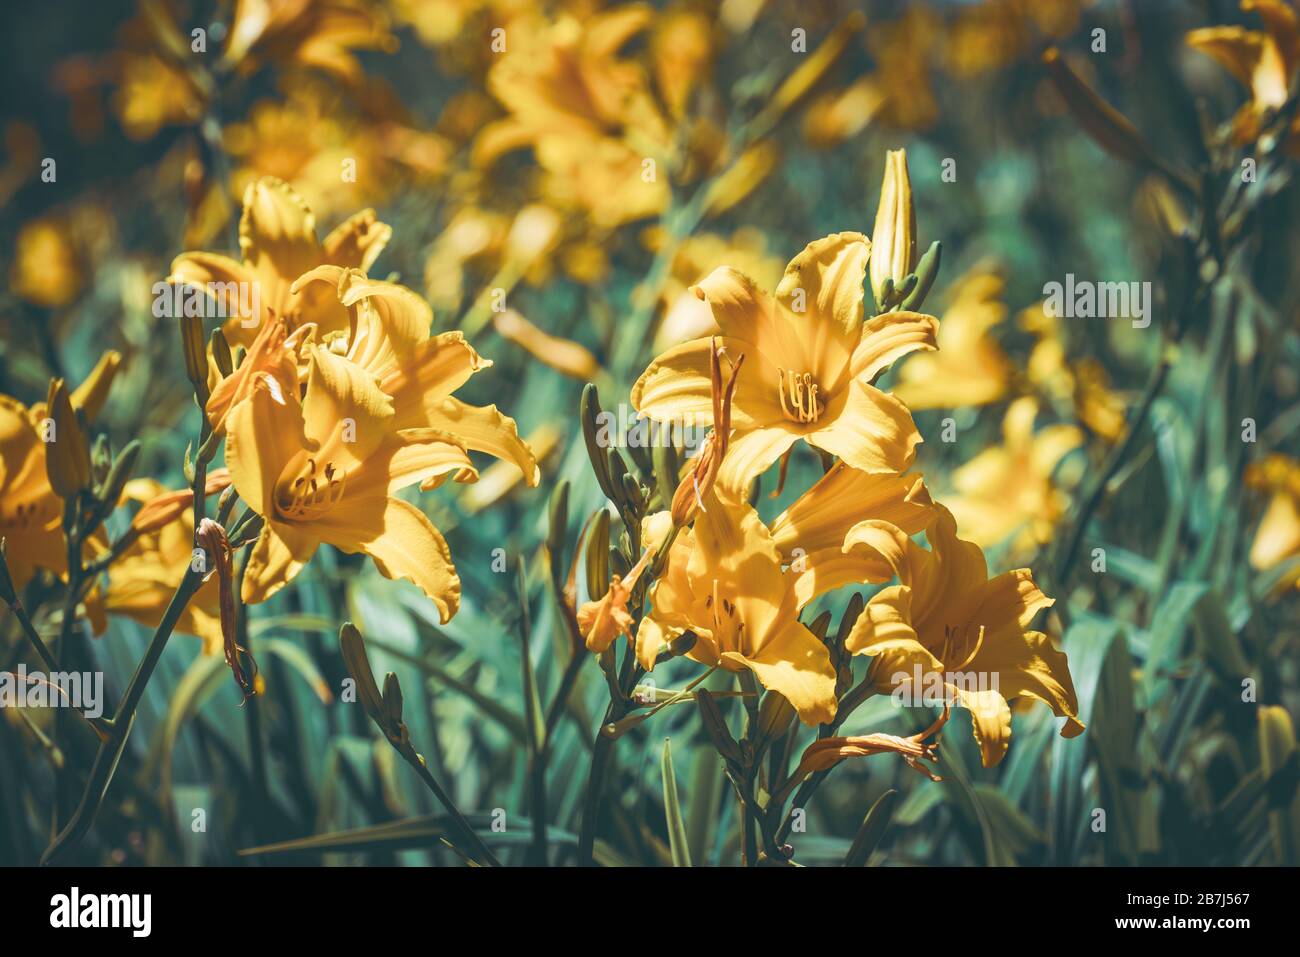 Yellow flowers of Daylily also known as Hemerocallis sp. Stock Photo